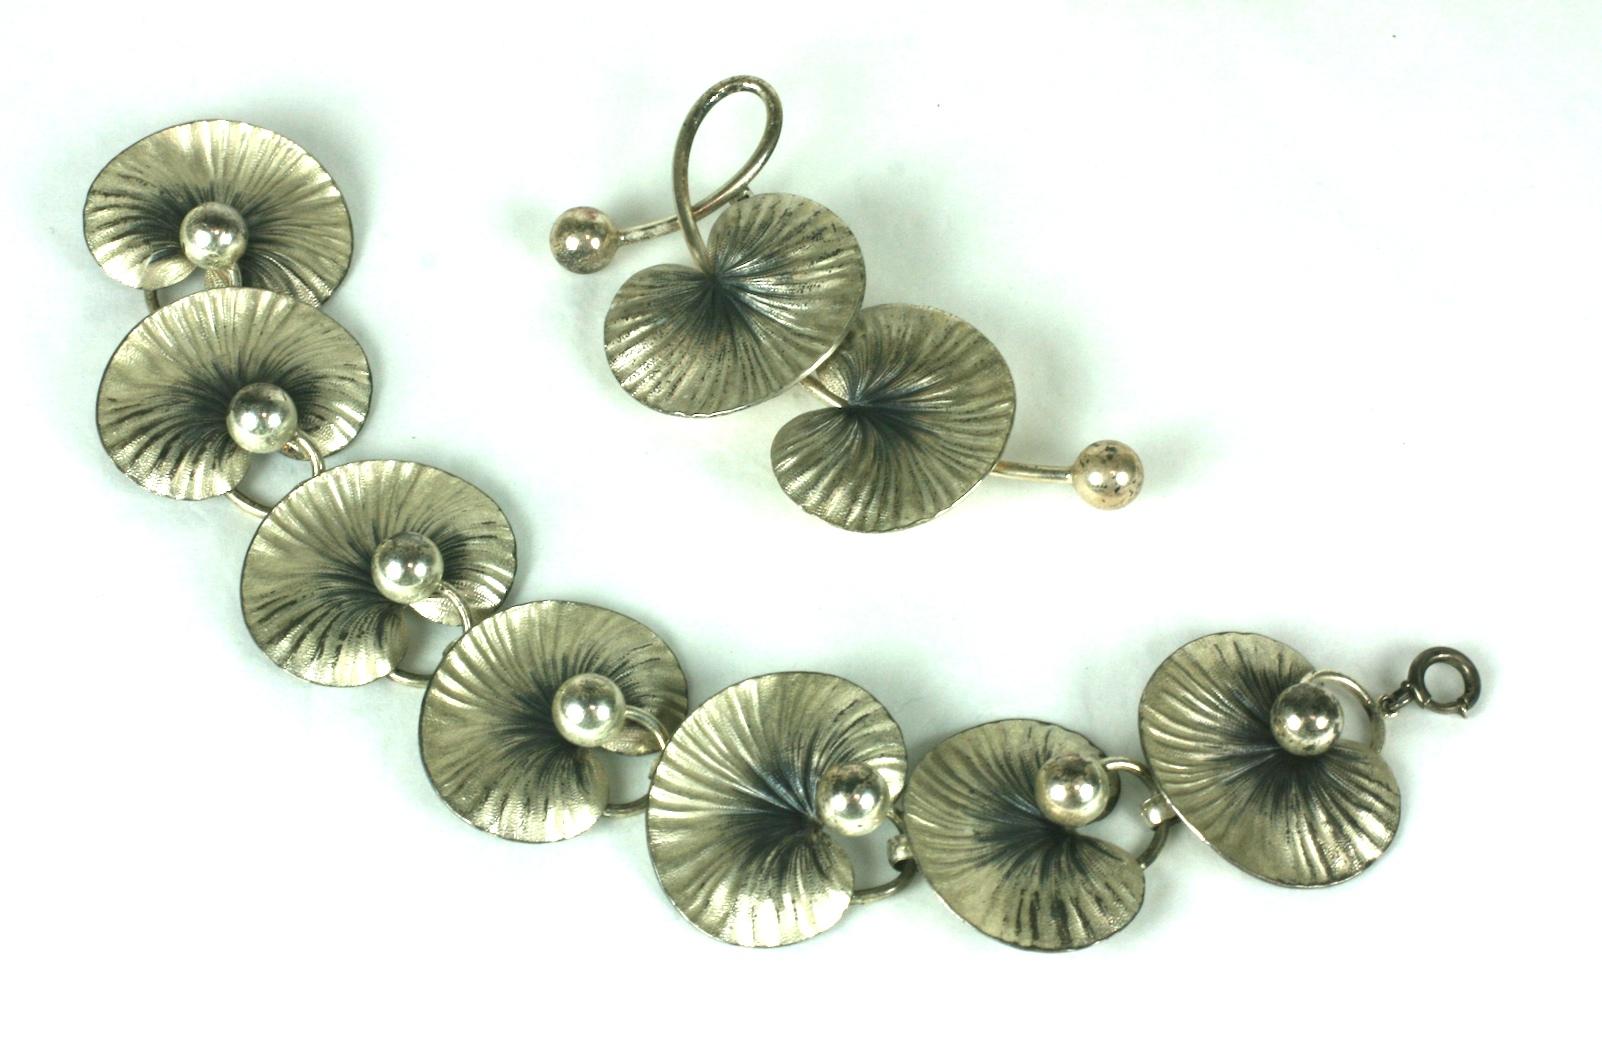 Forstner Arts and Crafts patinaed  sterling silver lily pad parure. Consisting of a link bracelet, brooch and earclips.
Excellent Condition, Signed. 
Bracelet  Length 7. 25